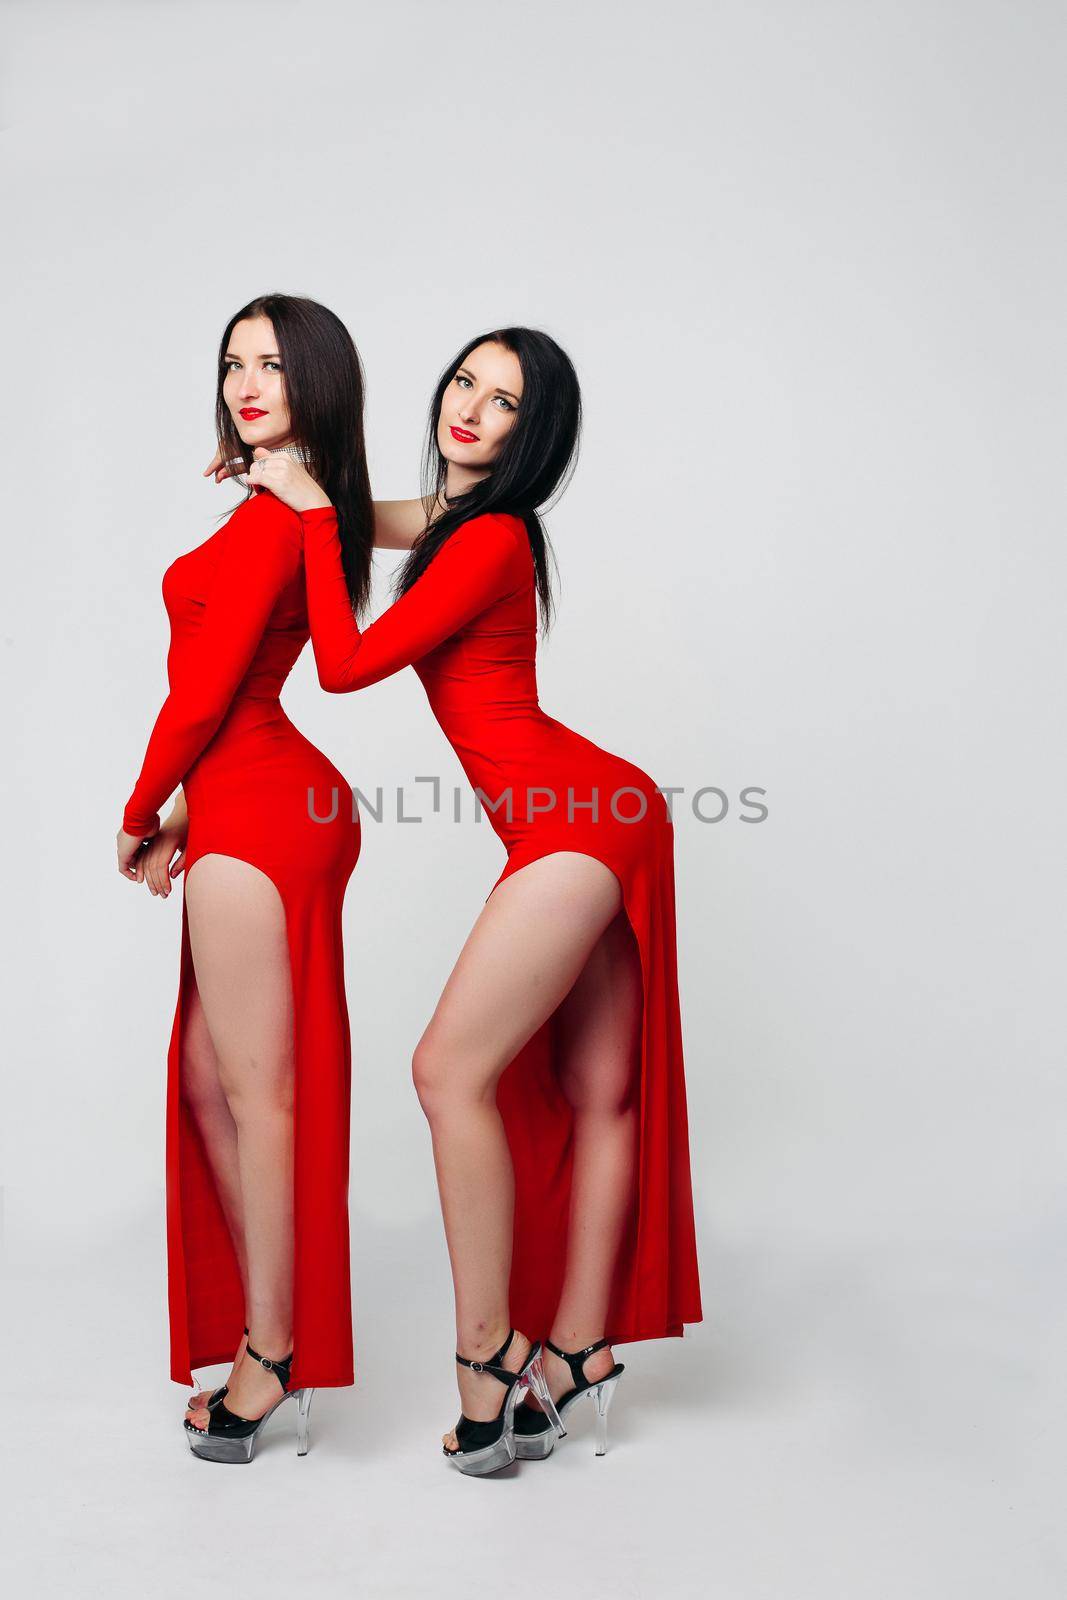 Studio full length of two sexy twins with black hair and bright make-up wearing long red dresses and high heels for pole dancing over white background. Looking at camera.